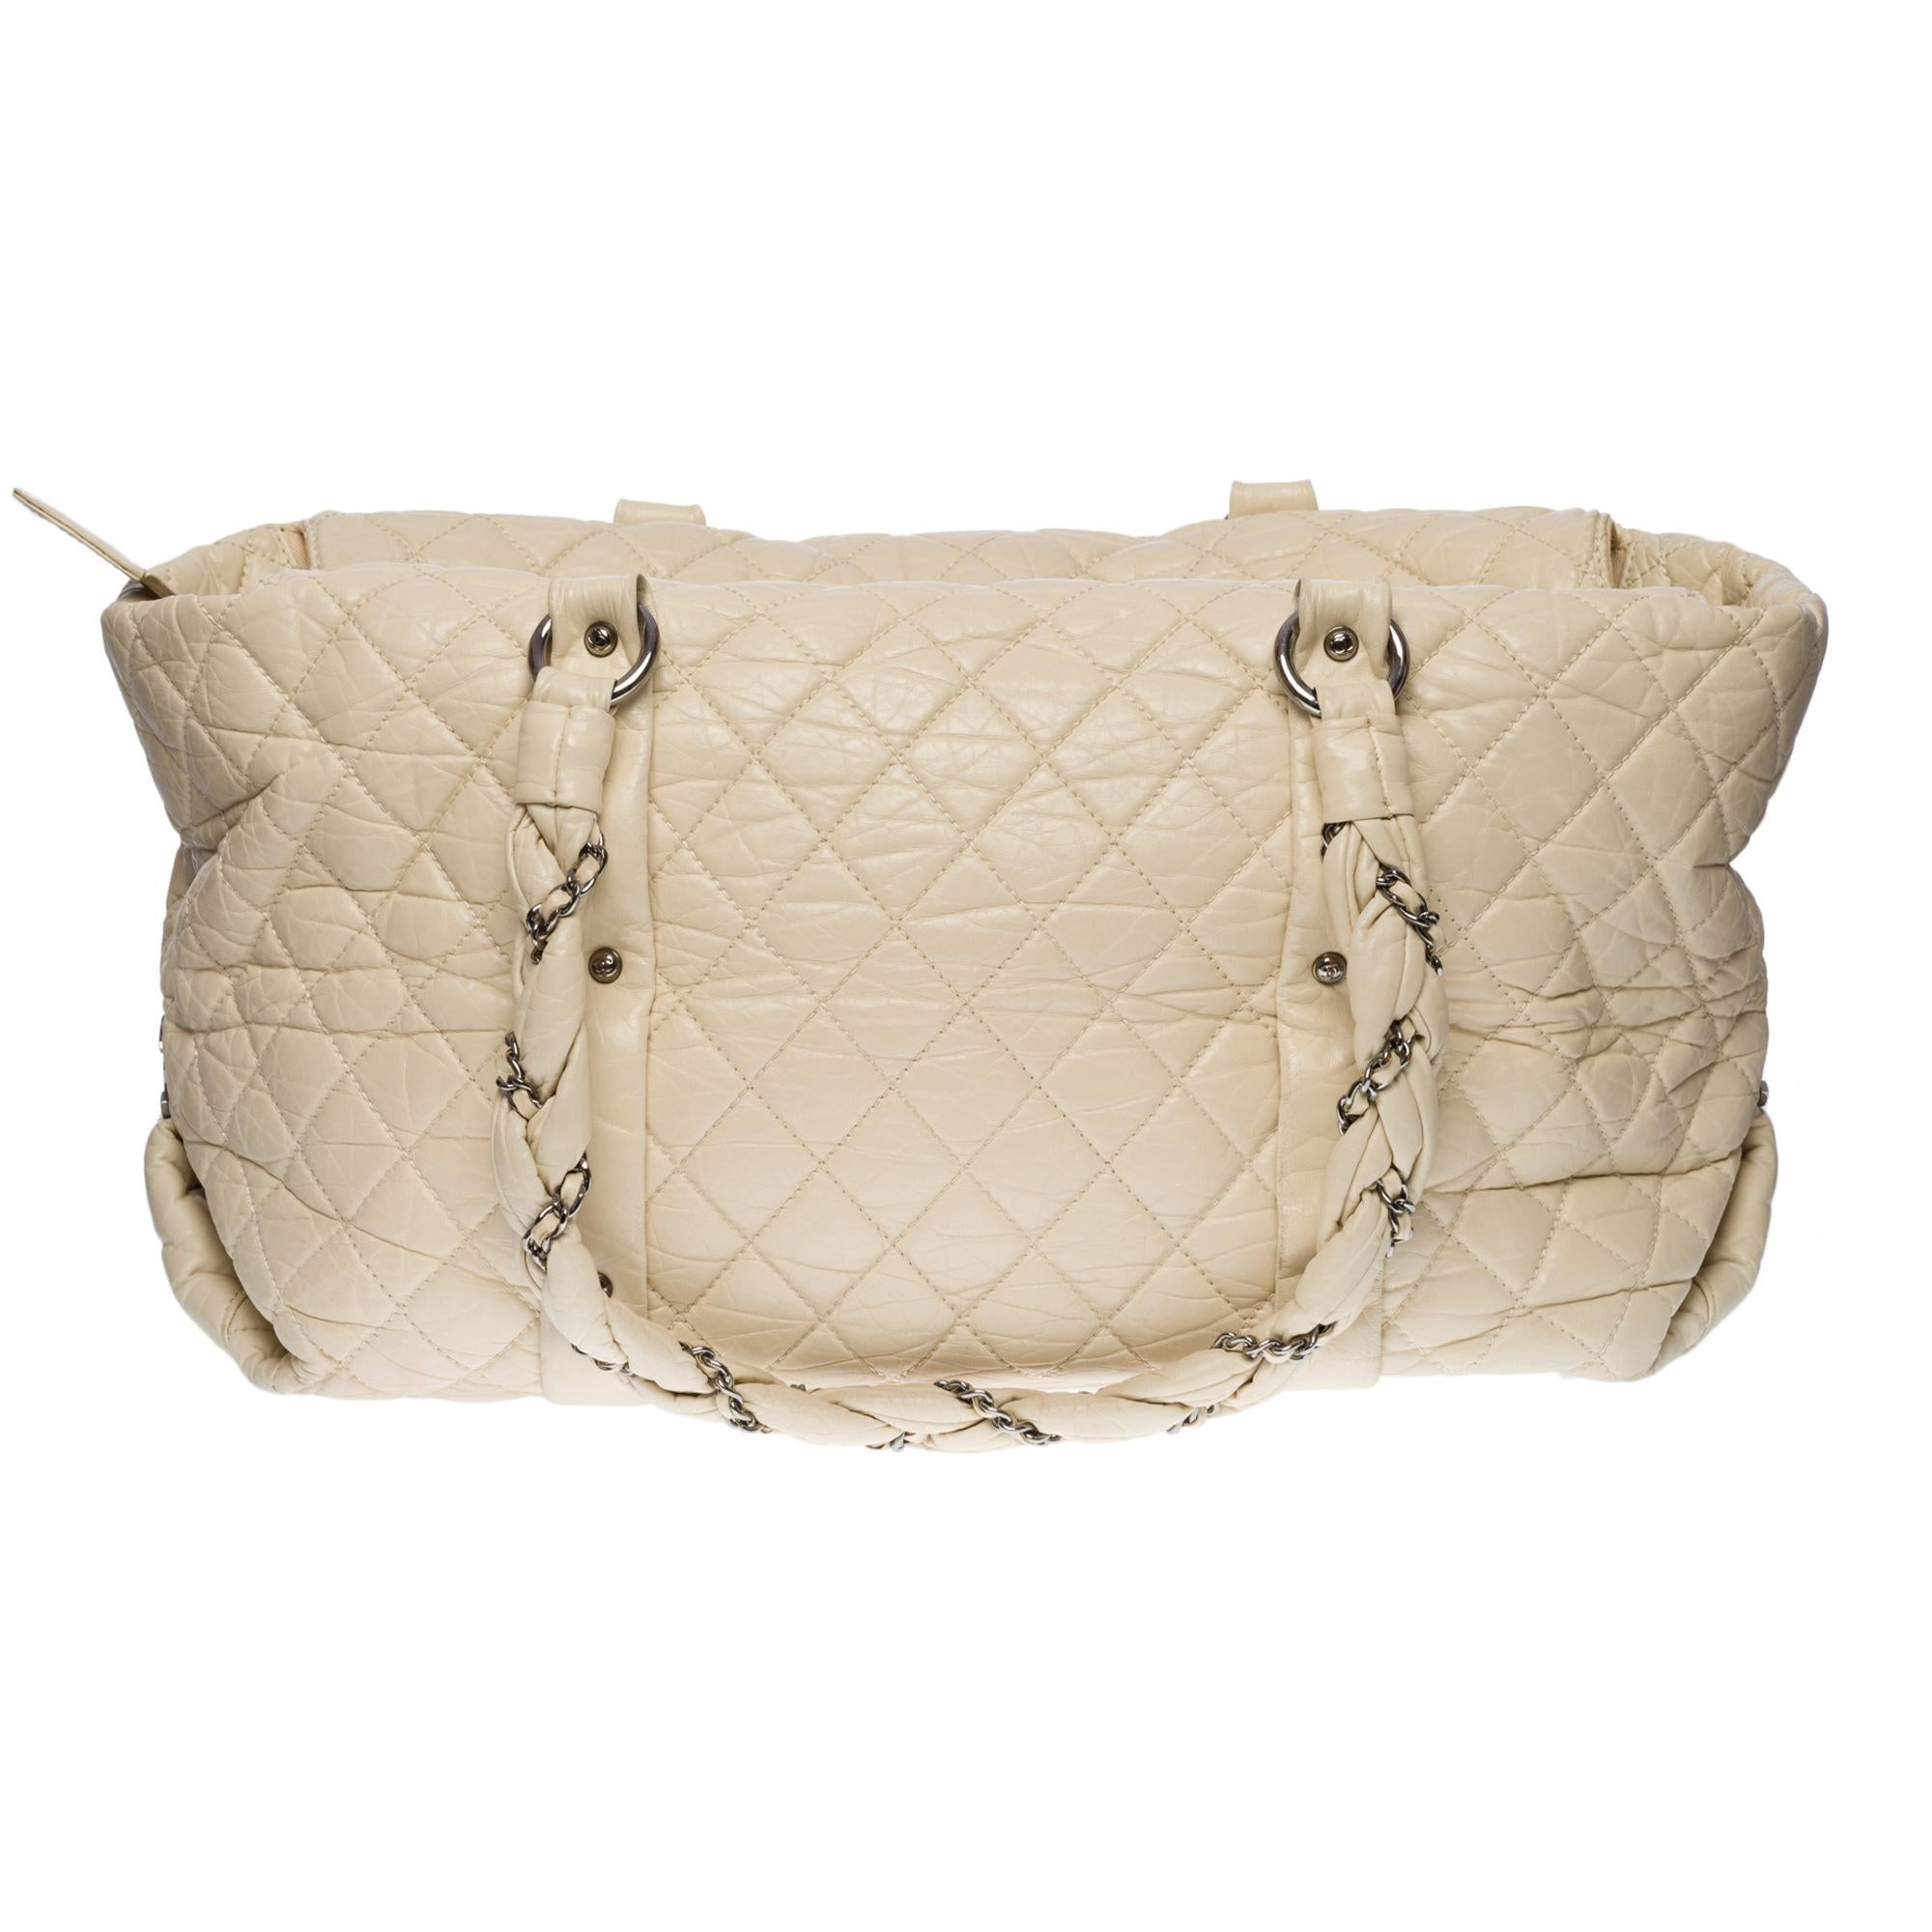 Gorgeous Chanel XL Tote bag in ivory puffy quilted leather, silver metal hardware, silver metal chain interwoven with ivory leather for a hand or shoulder support
Central zip closure on top
1 front zip pocket
Beige canvas interior, 1 zippered